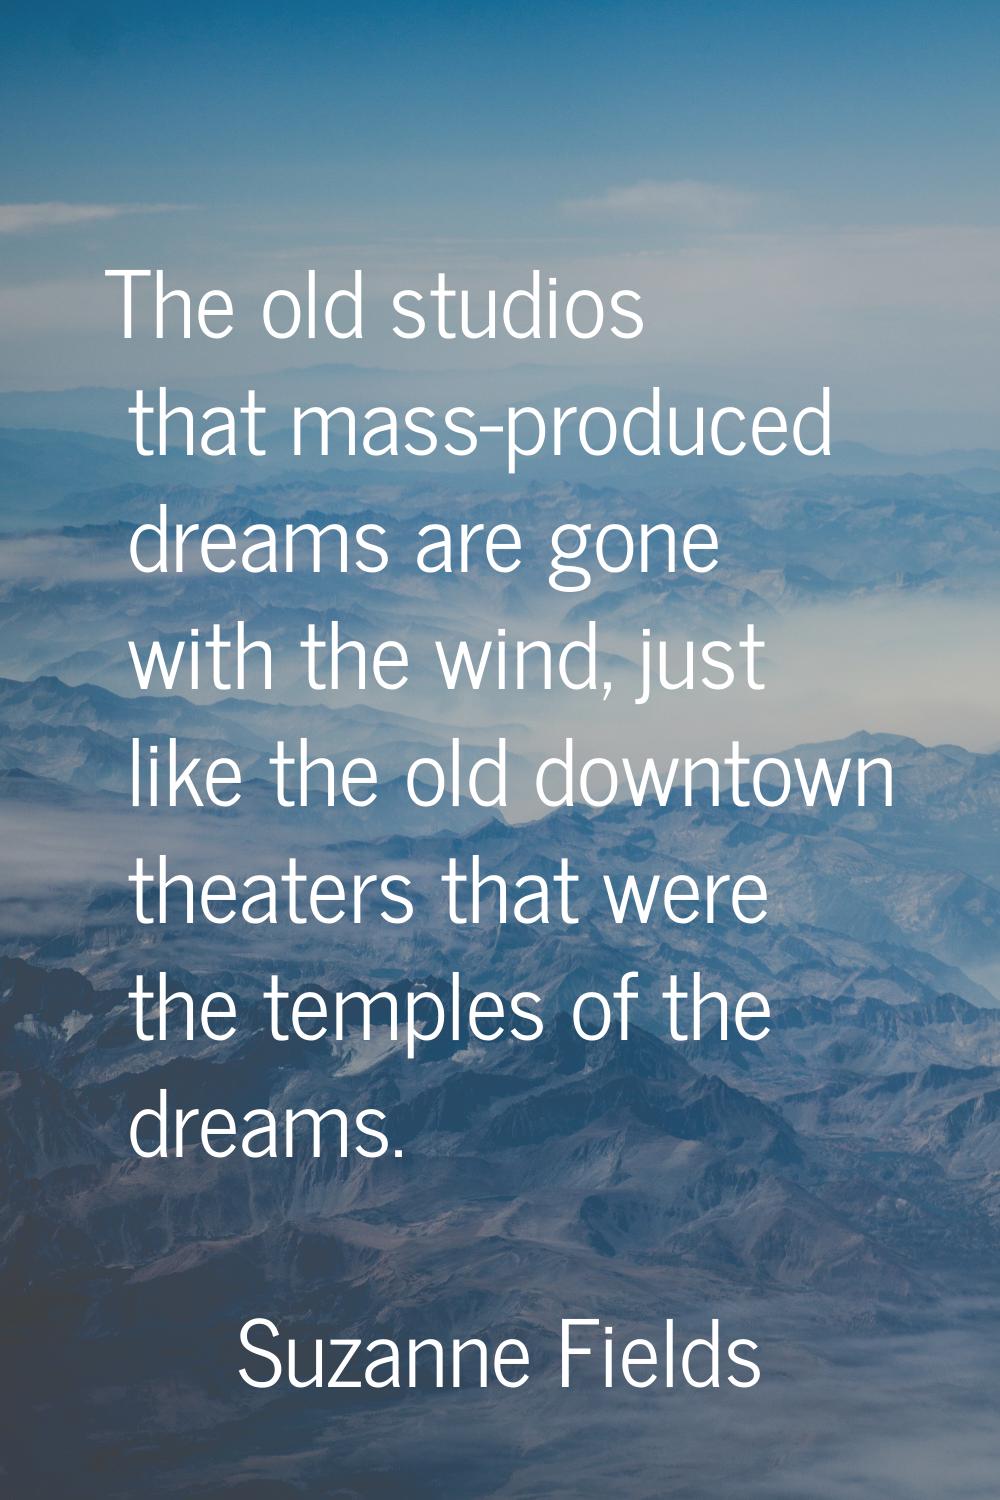 The old studios that mass-produced dreams are gone with the wind, just like the old downtown theate